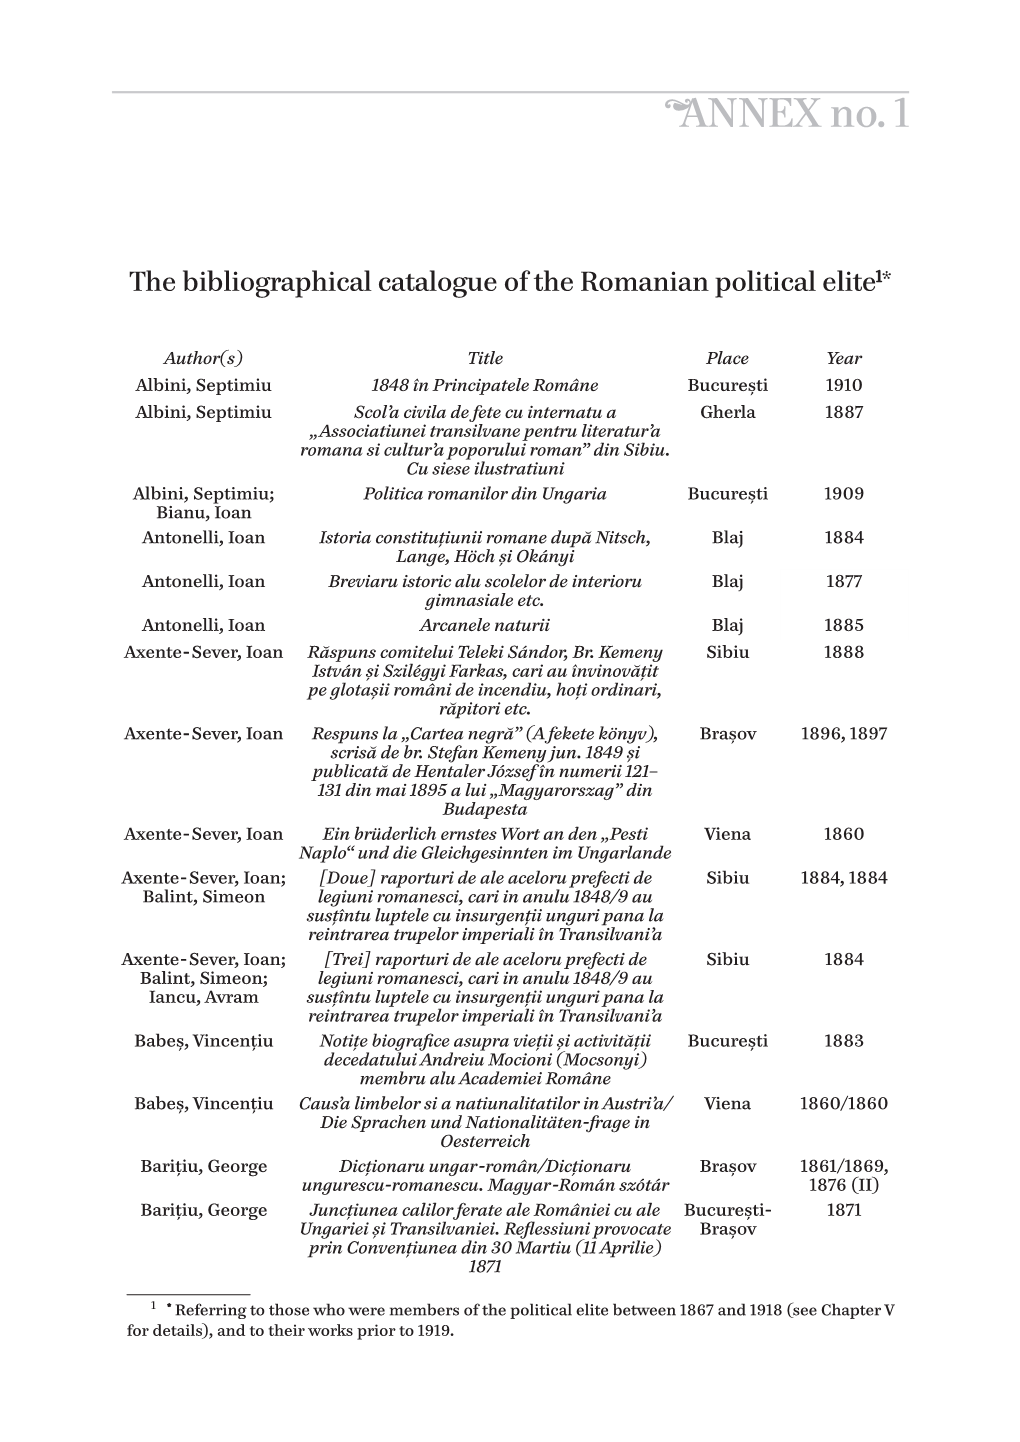 The Bibliographic Catalogue of the Romanian Political